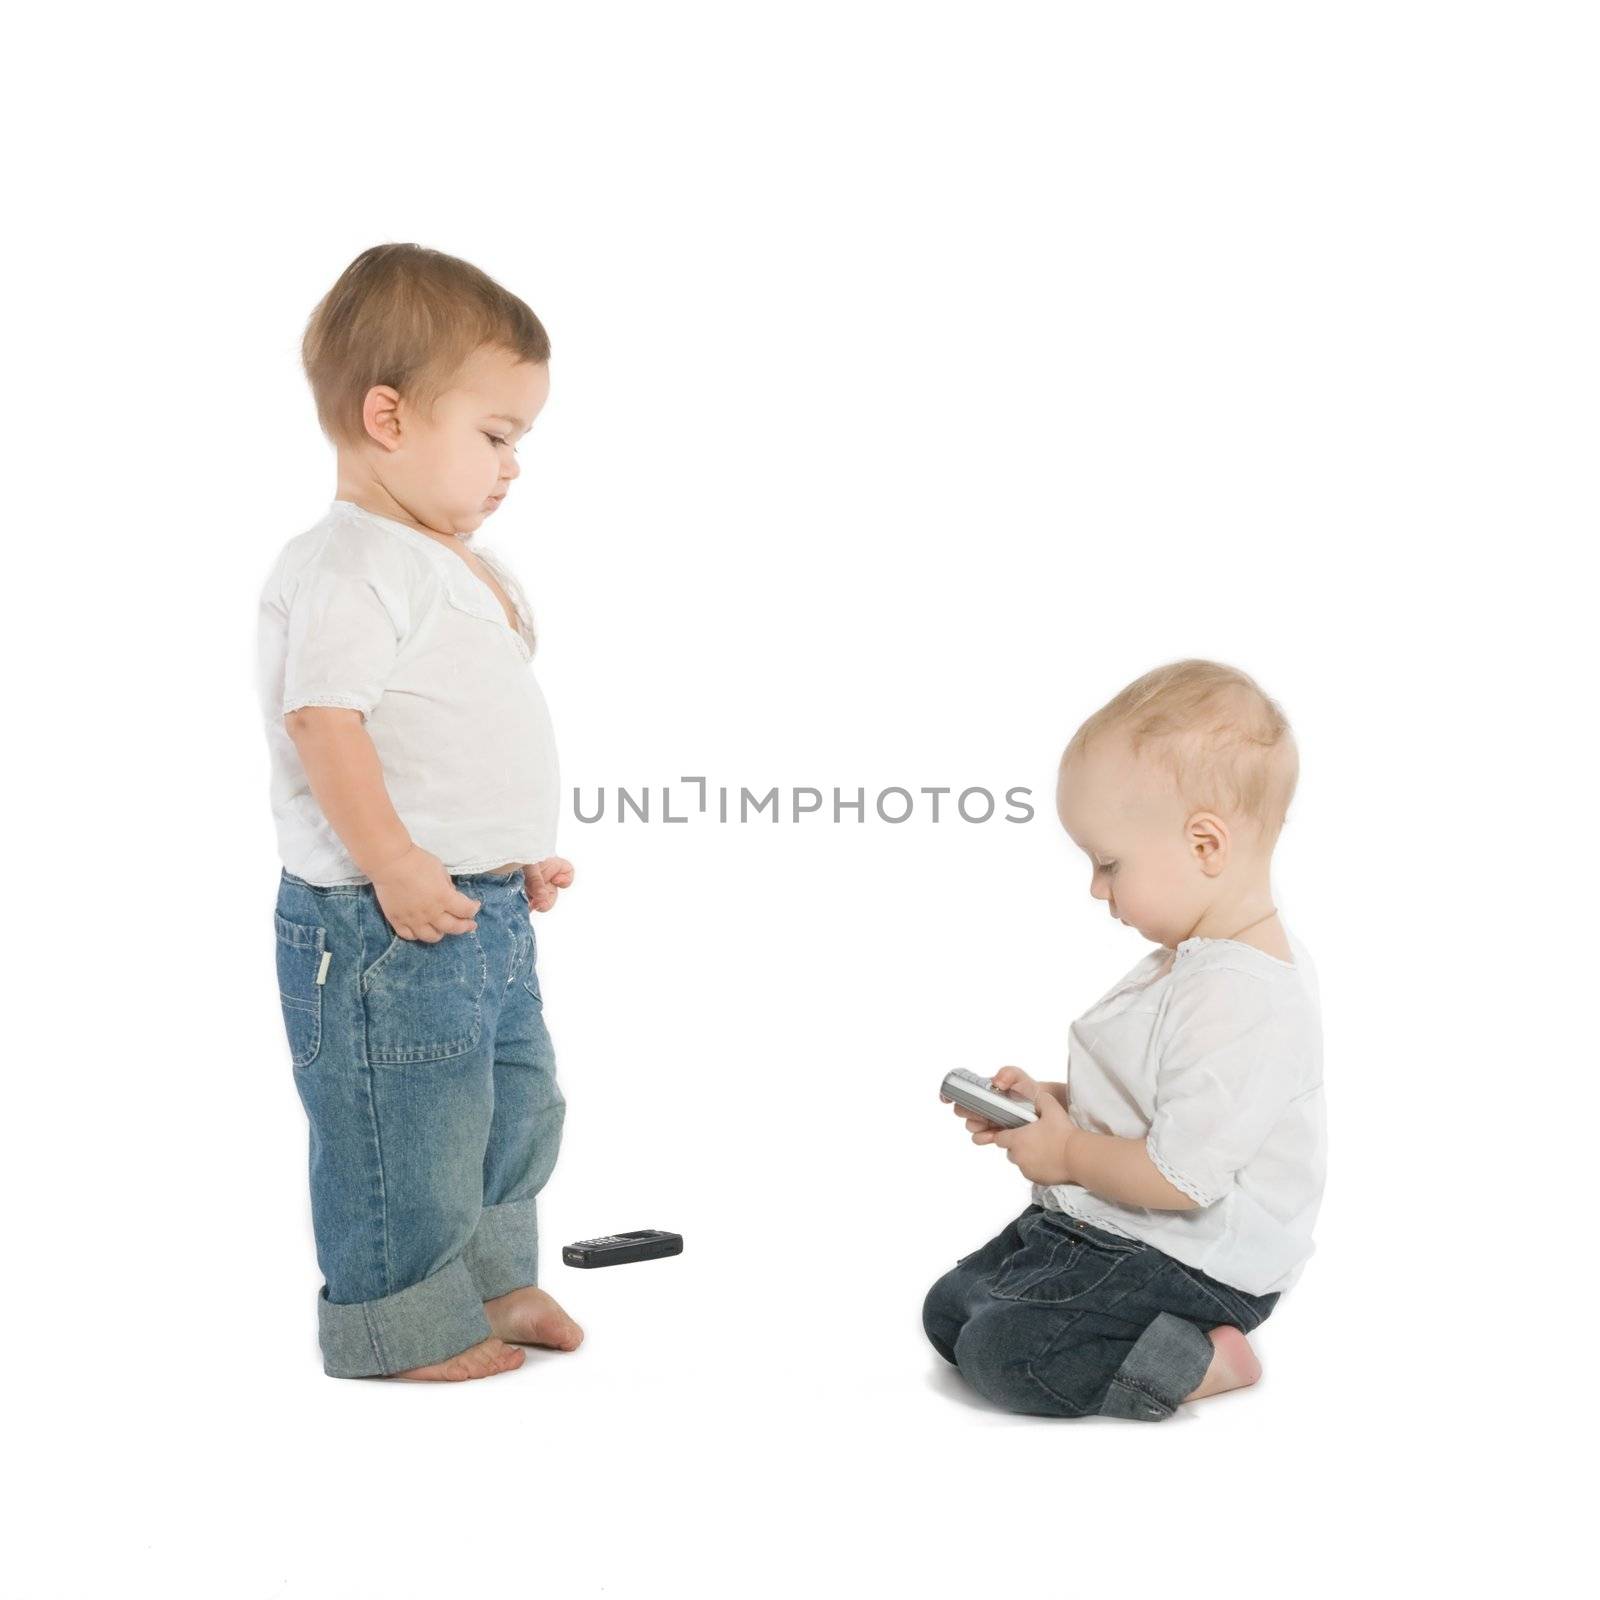 Two little boys with cellphones, white background
